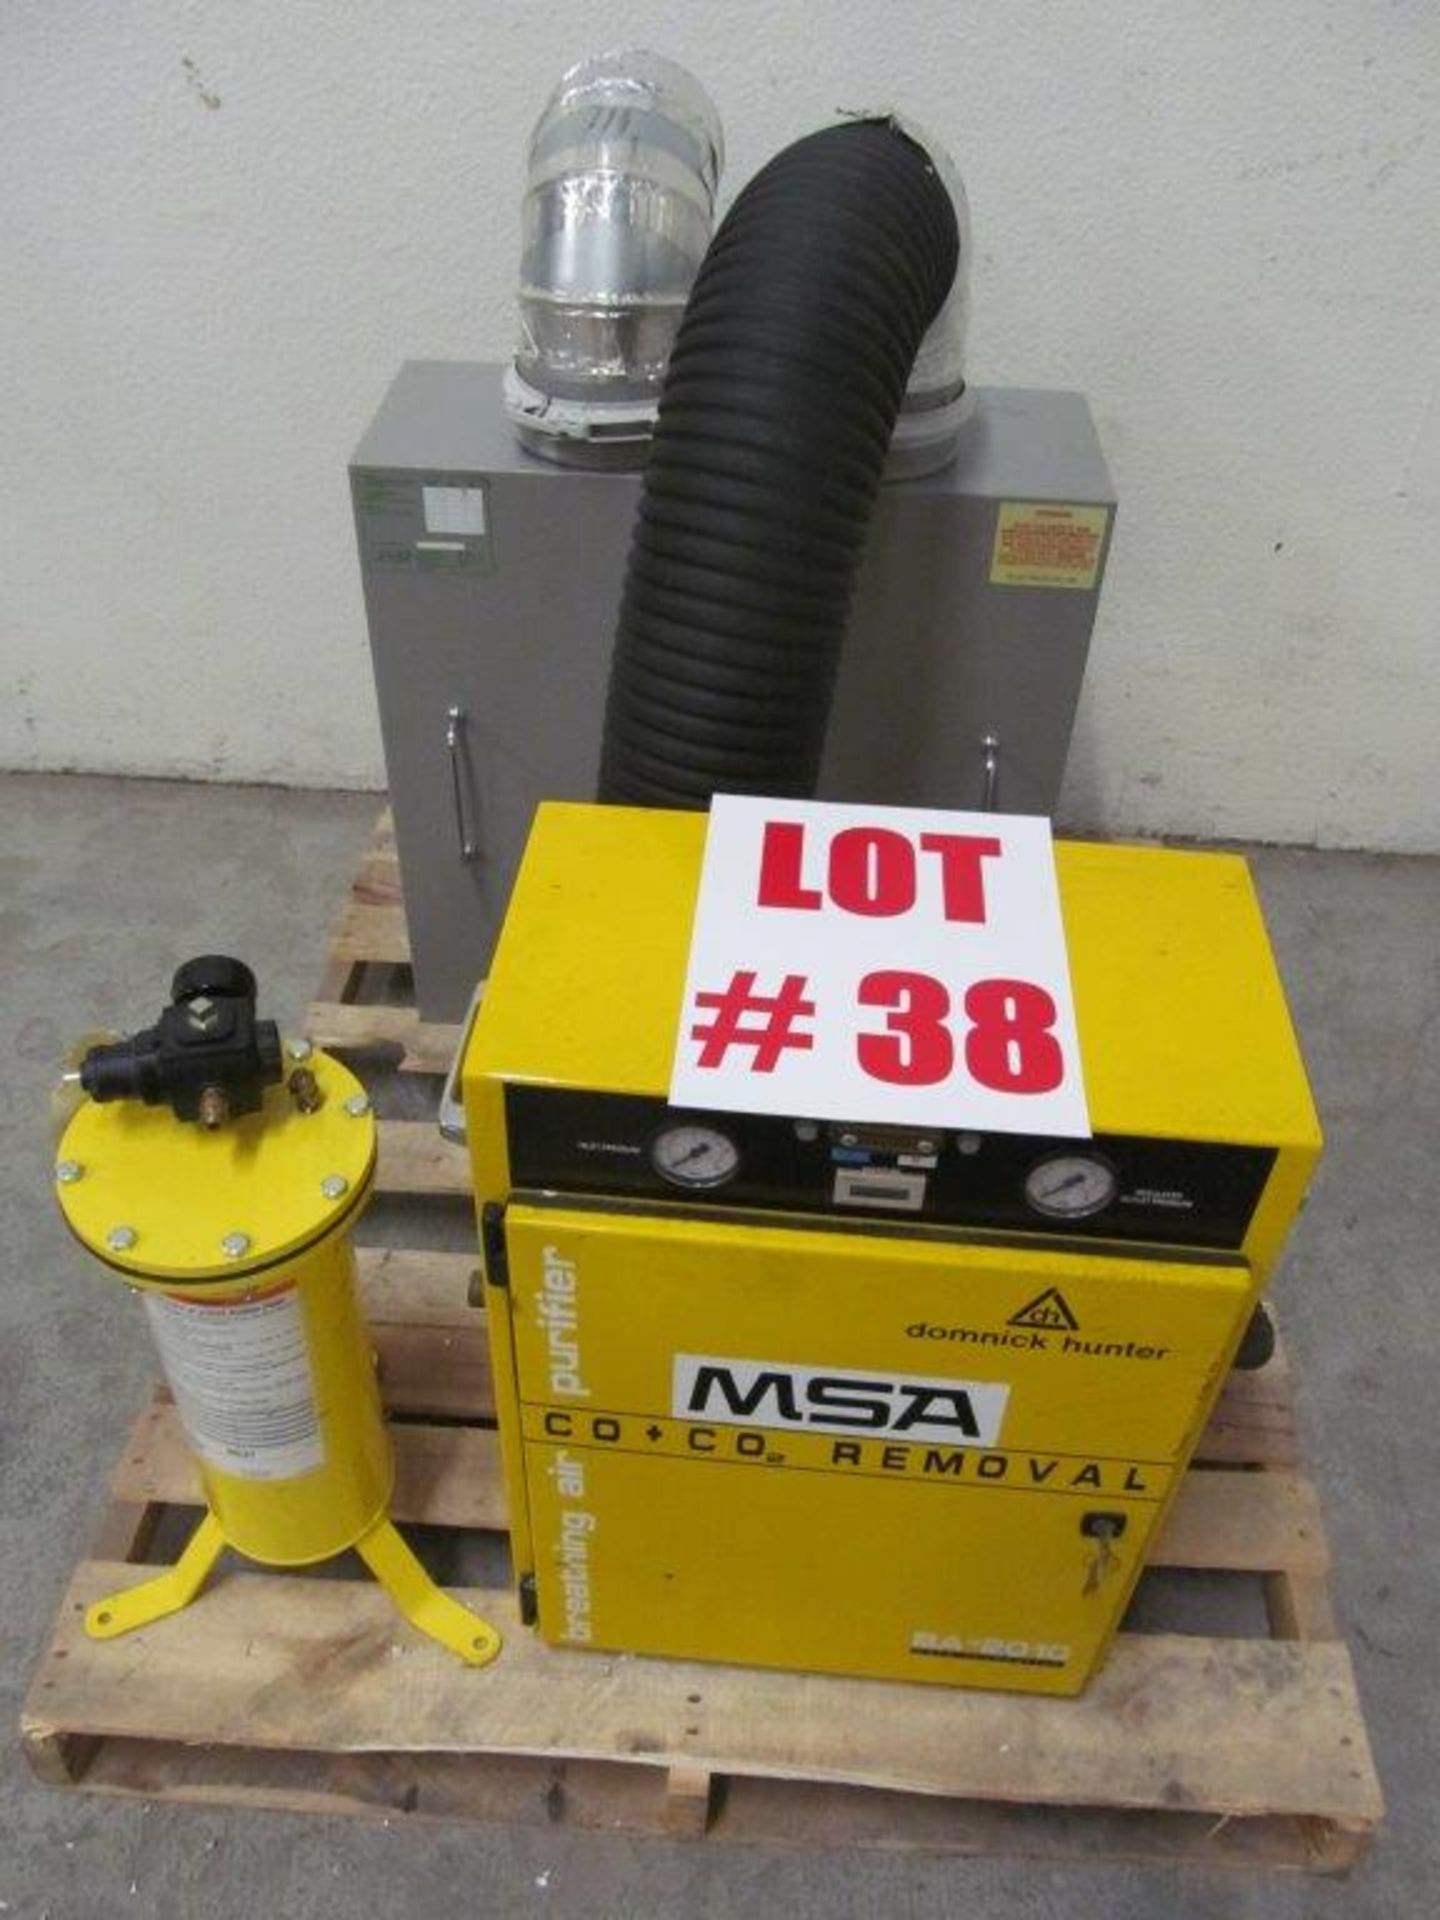 MSA CO + CO2 REMOVER, DOMNICK HUNTER BREATHING AIR PURIFIER 2010, S/N 067-37643 - LOCATION, - Image 2 of 5